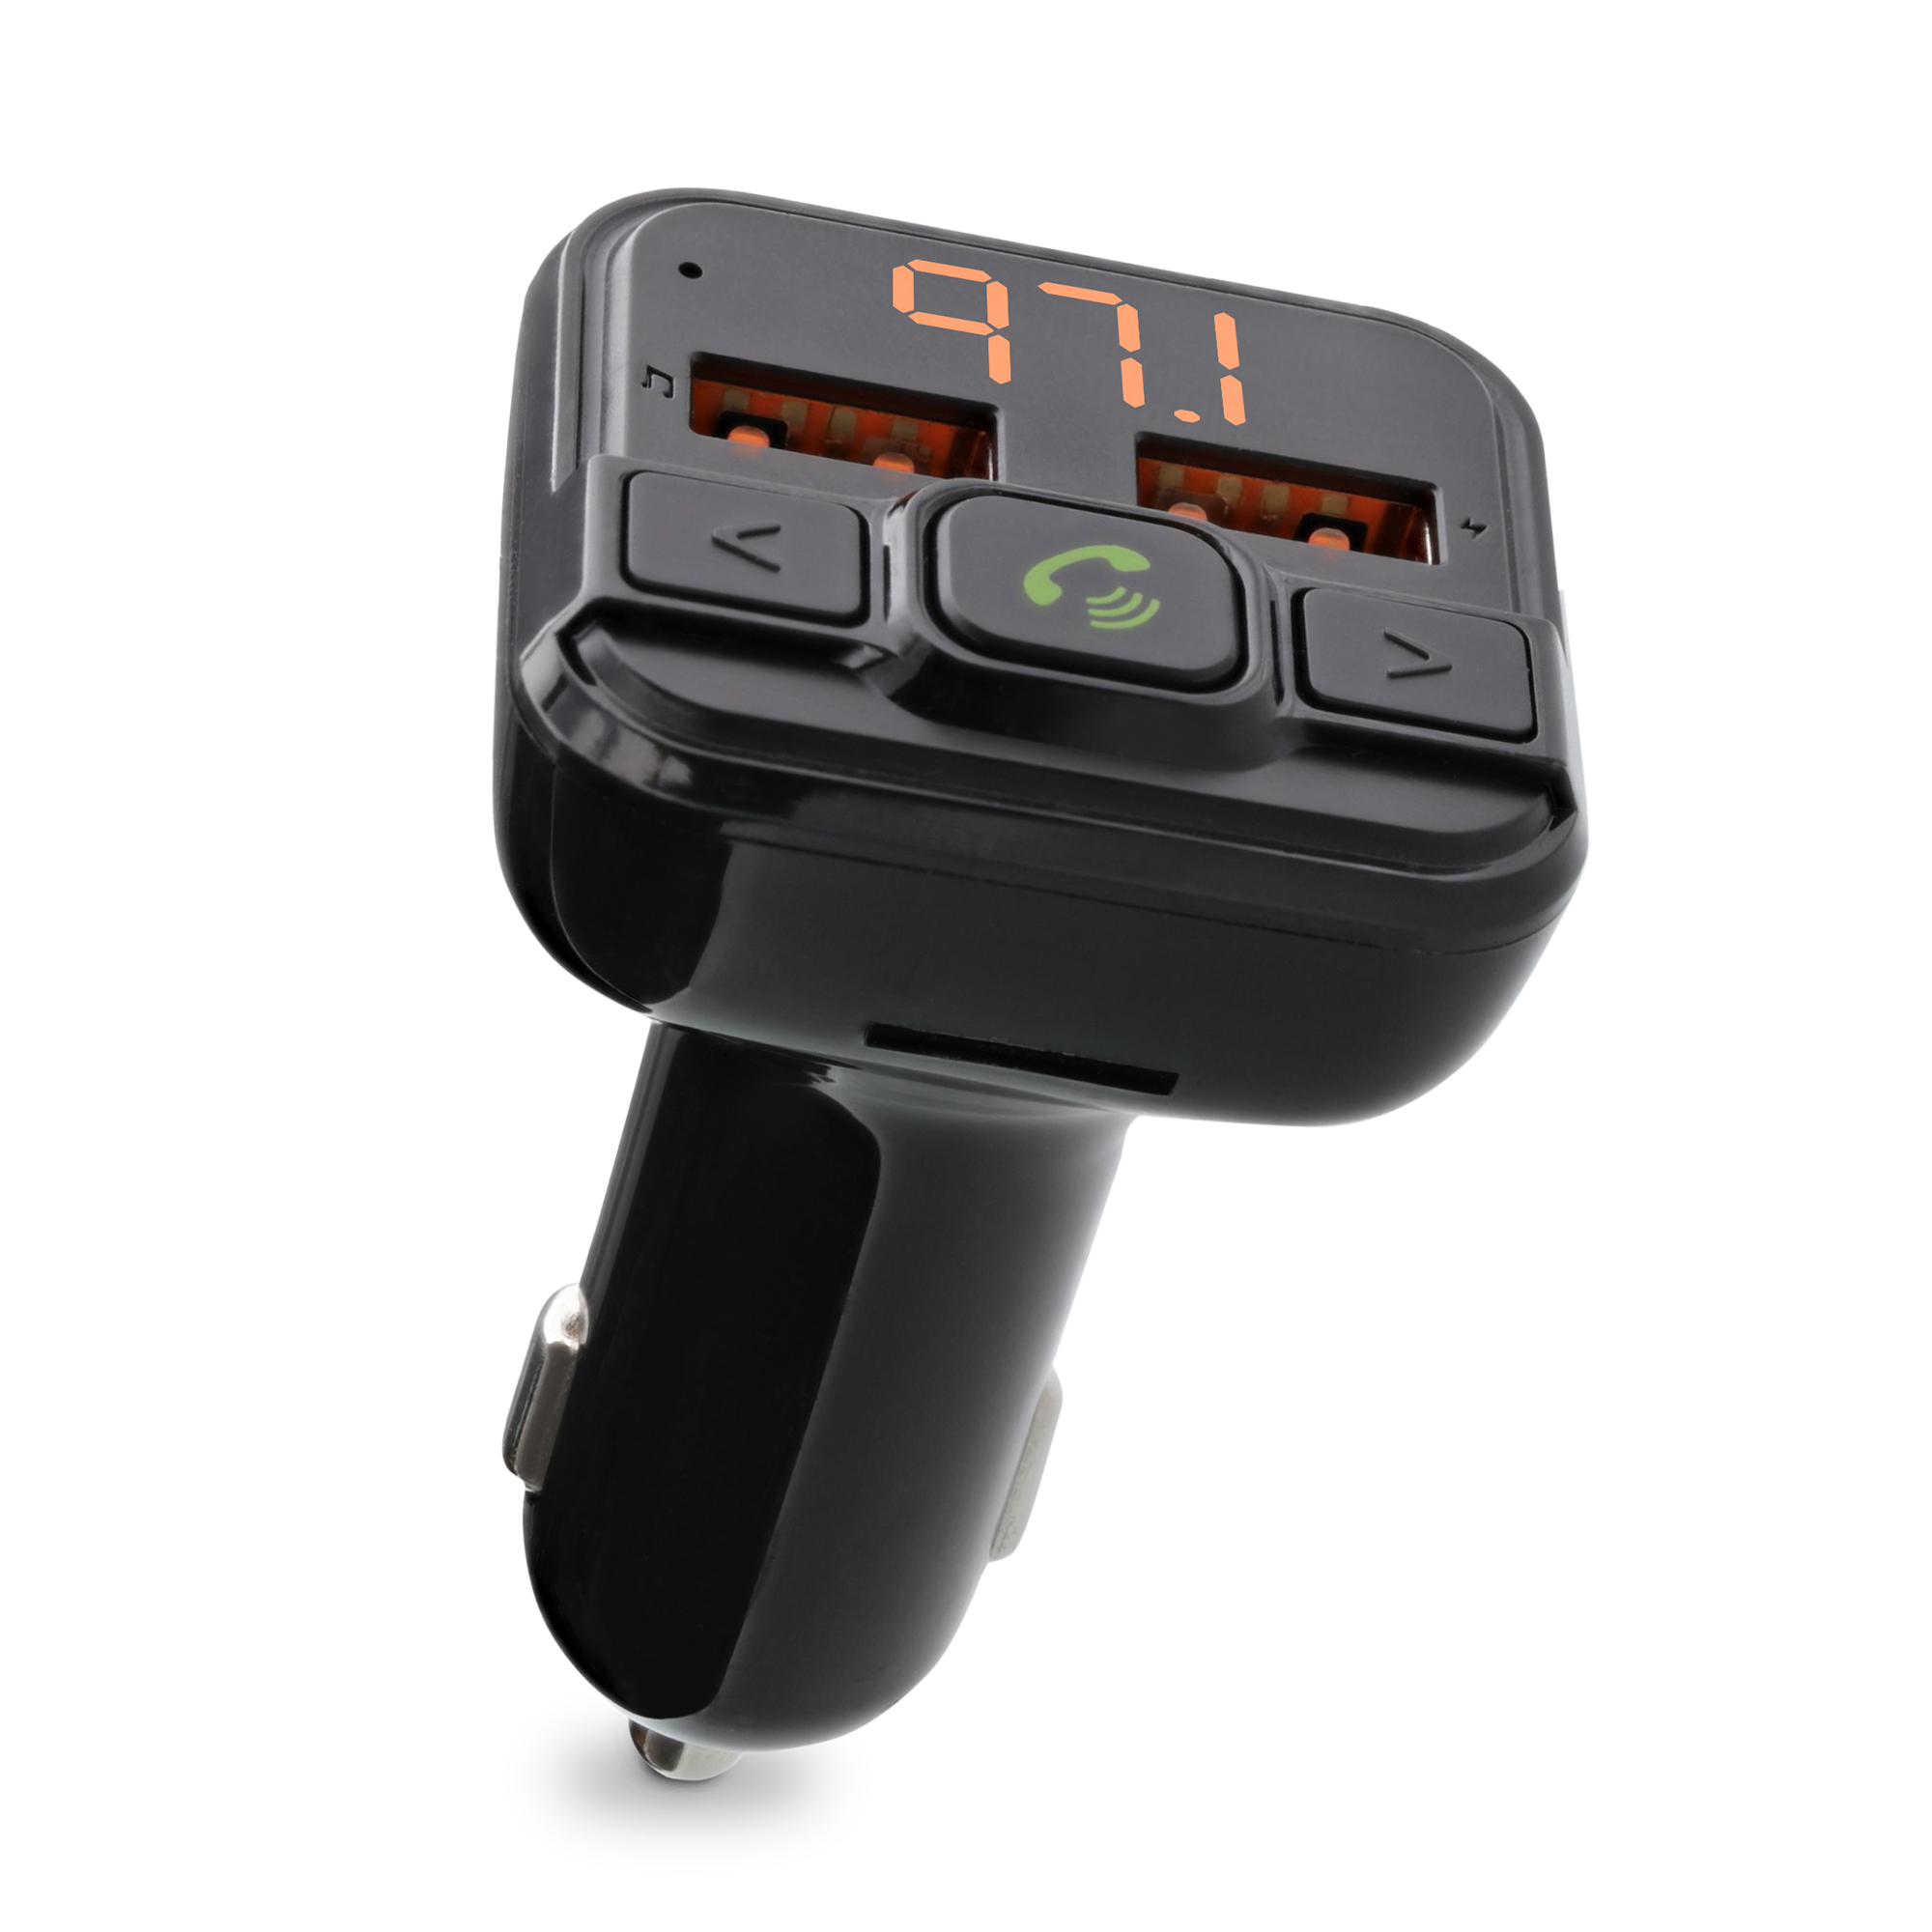 Auto Drive AA00277W Car FM Transmitter Black - Retails For 29.99!